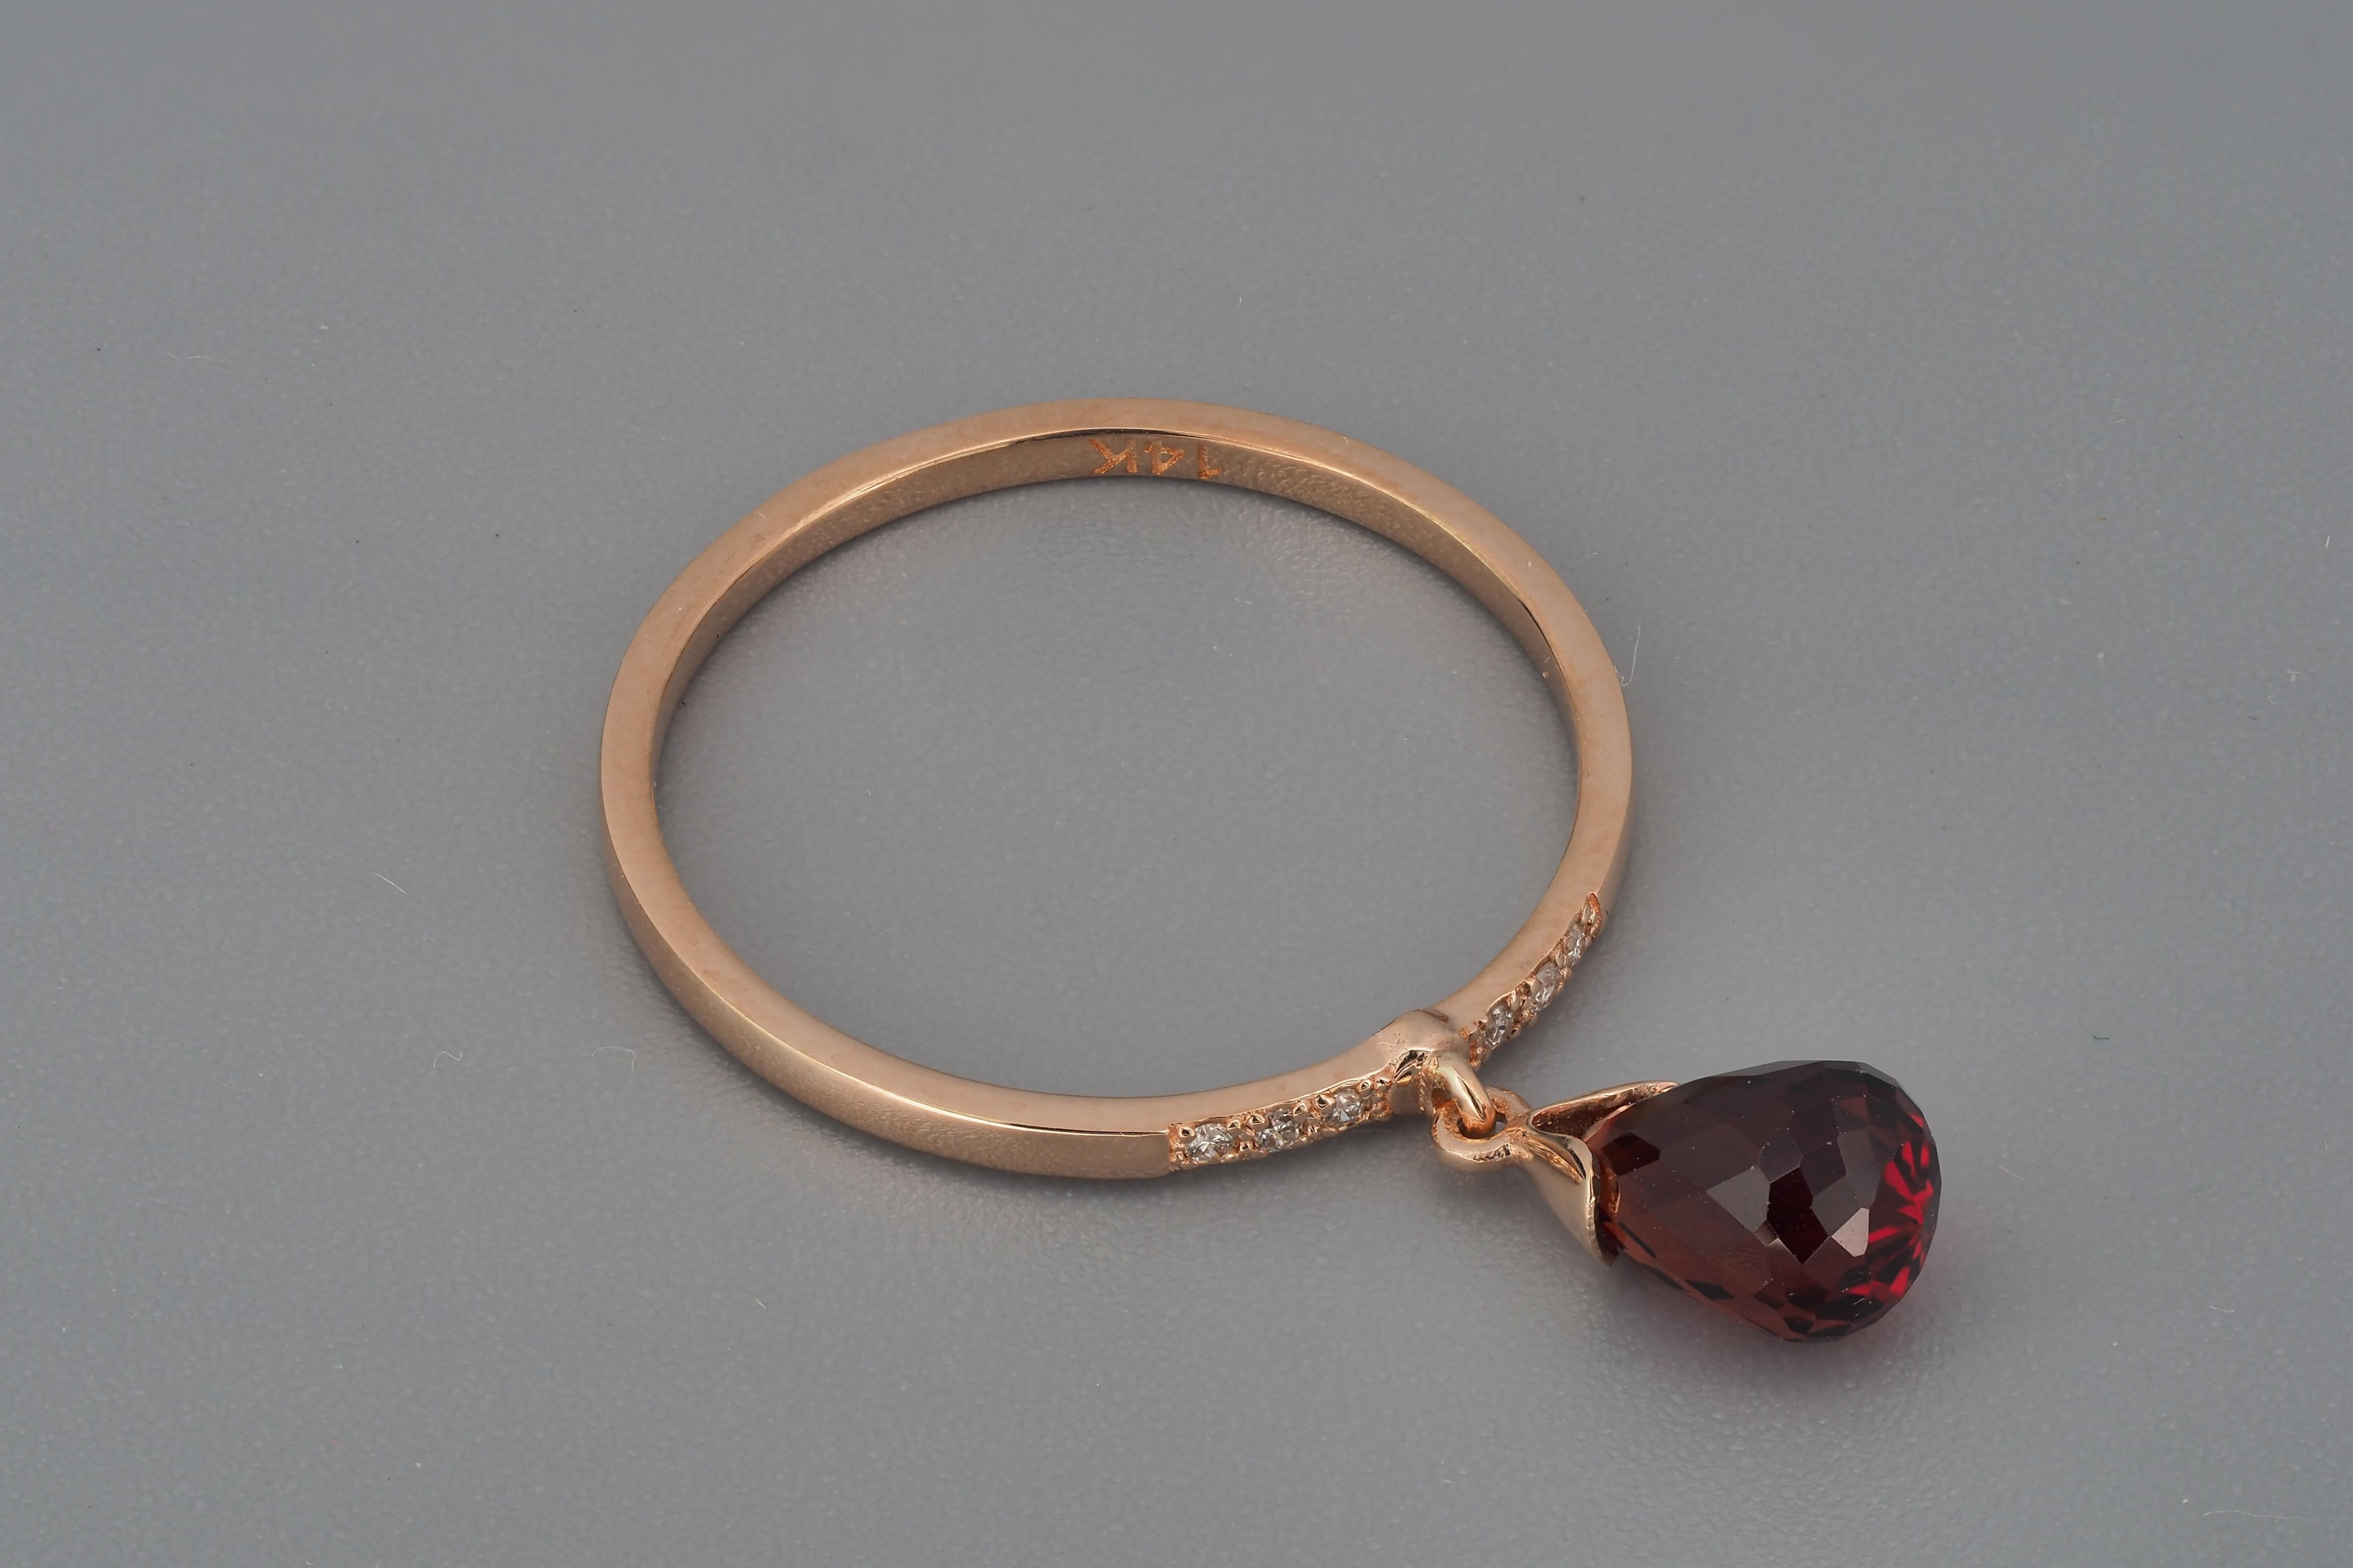 For Sale:  14k Gold Ring with Briolette Cut Garnet and Diamonds 4